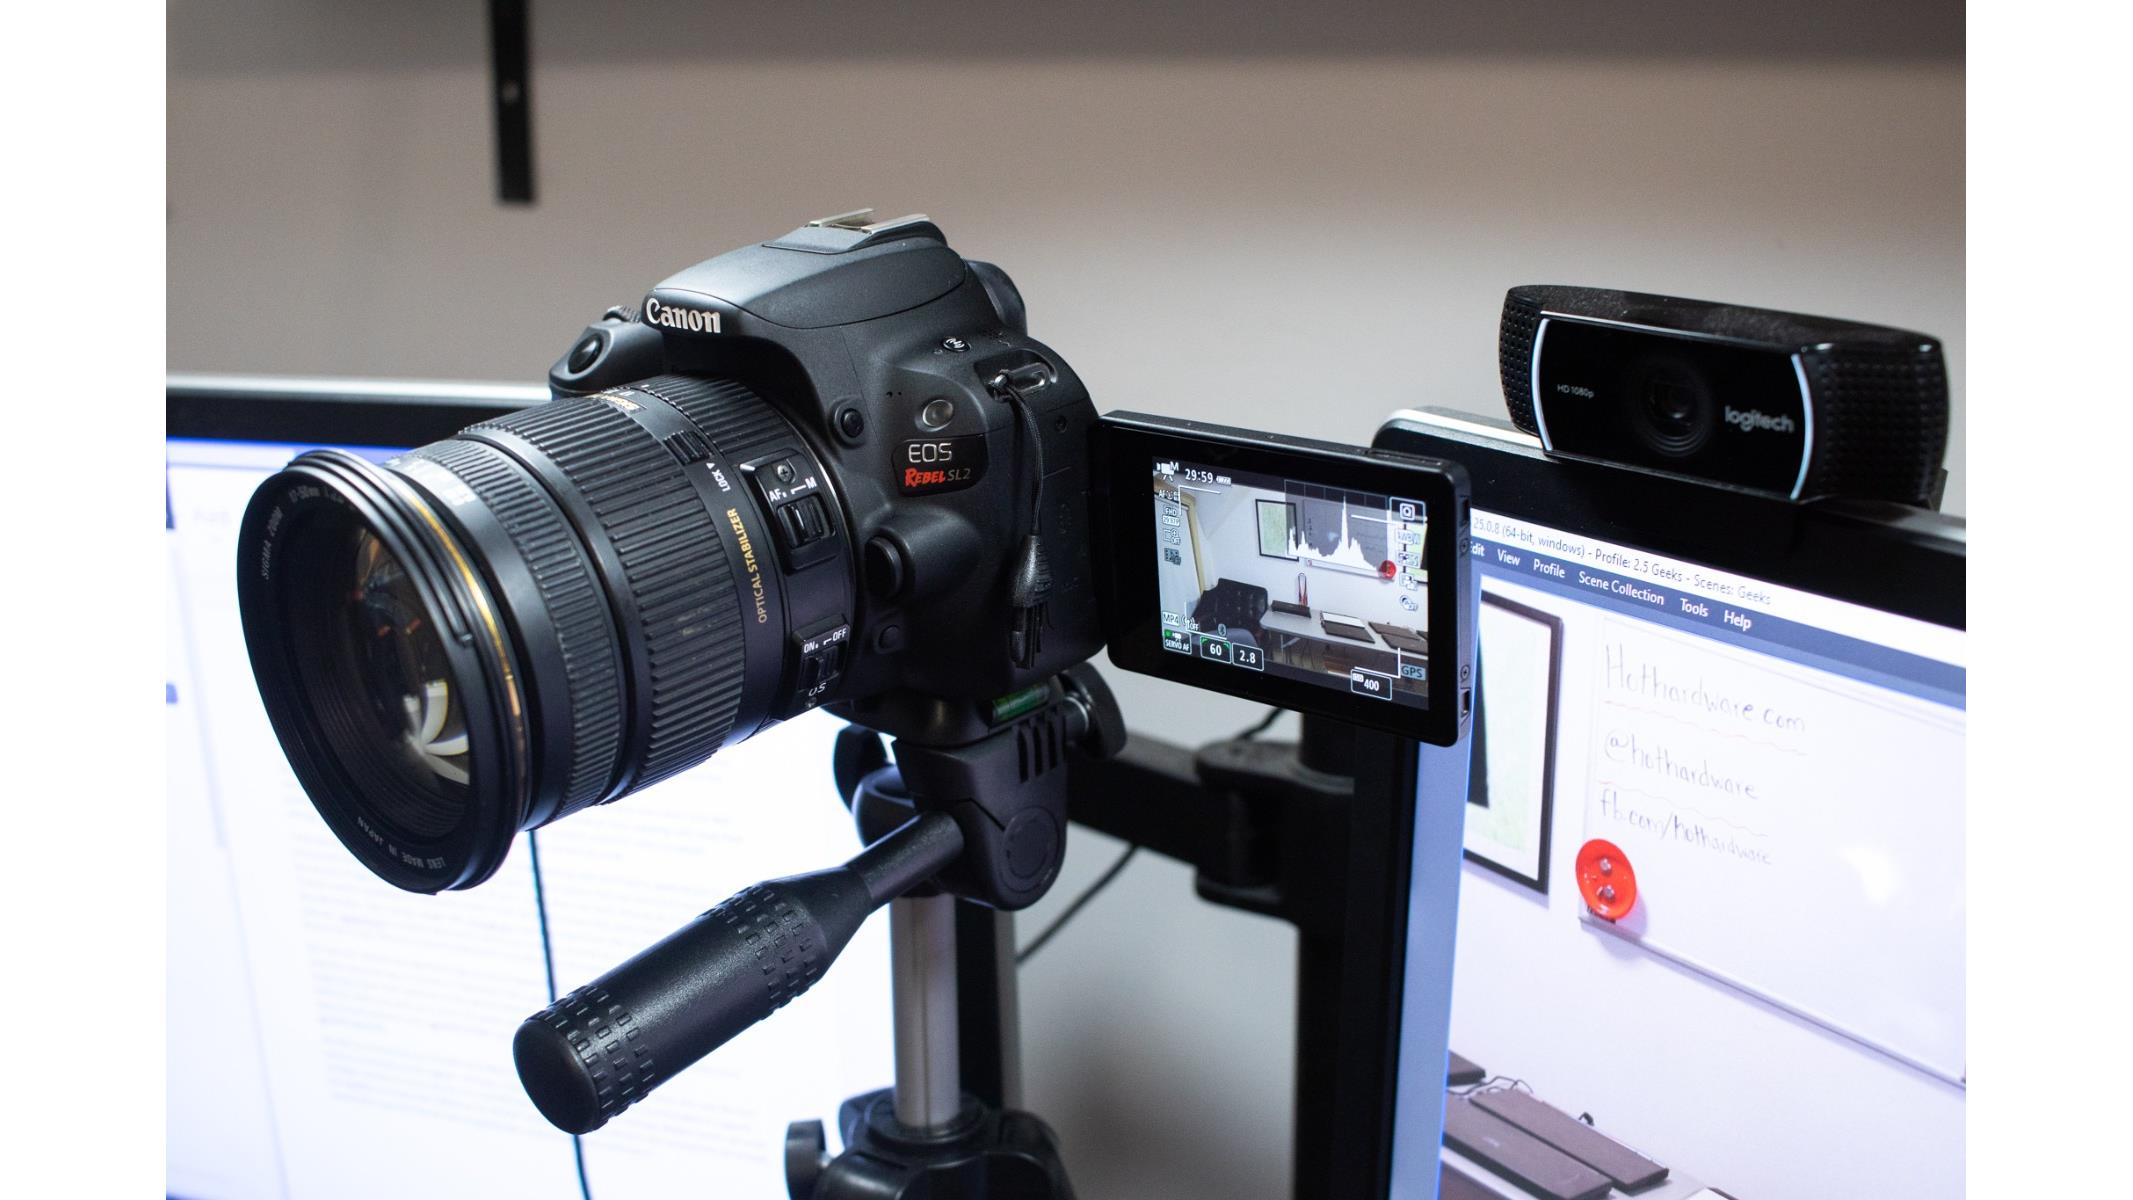 hypothese Helemaal droog herwinnen Here's How To Setup Your Canon DSLR As An Awesome USB Webcam For Video  Chats | HotHardware